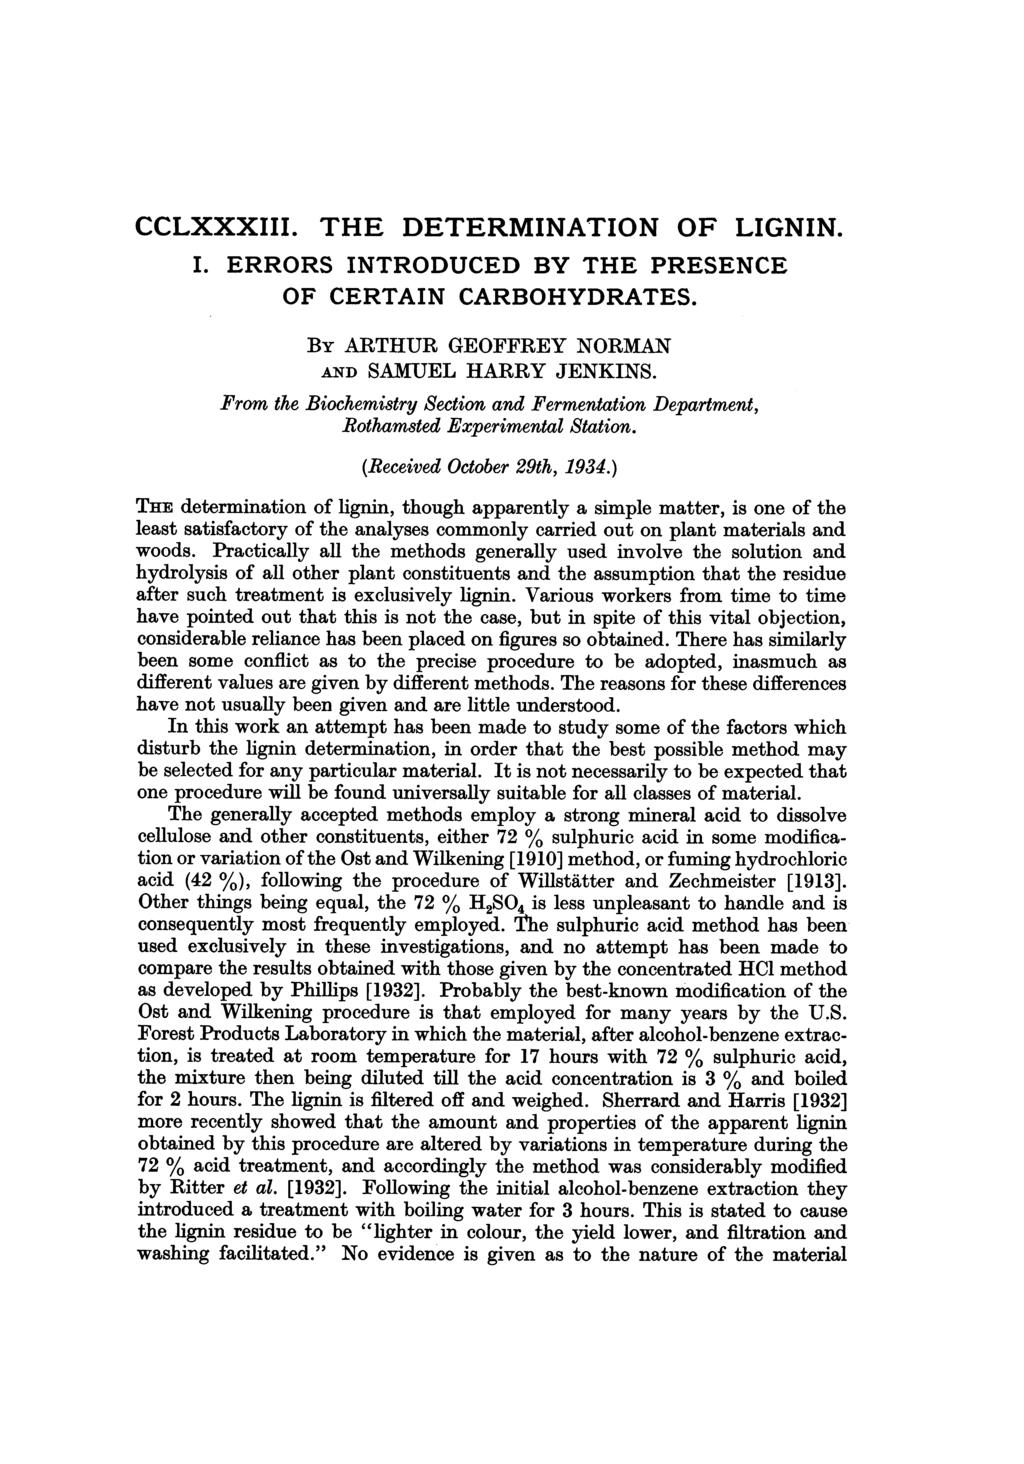 CCLXXXIII. THE DETERMINATION OF LIGNIN. I. ERRORS INTRODUCED BY THE PRESENCE OF CERTAIN CARBOHYDRATES. BY ARTHUR GEOFFREY NORMAN AND SAMUEL HARRY JENKINS.